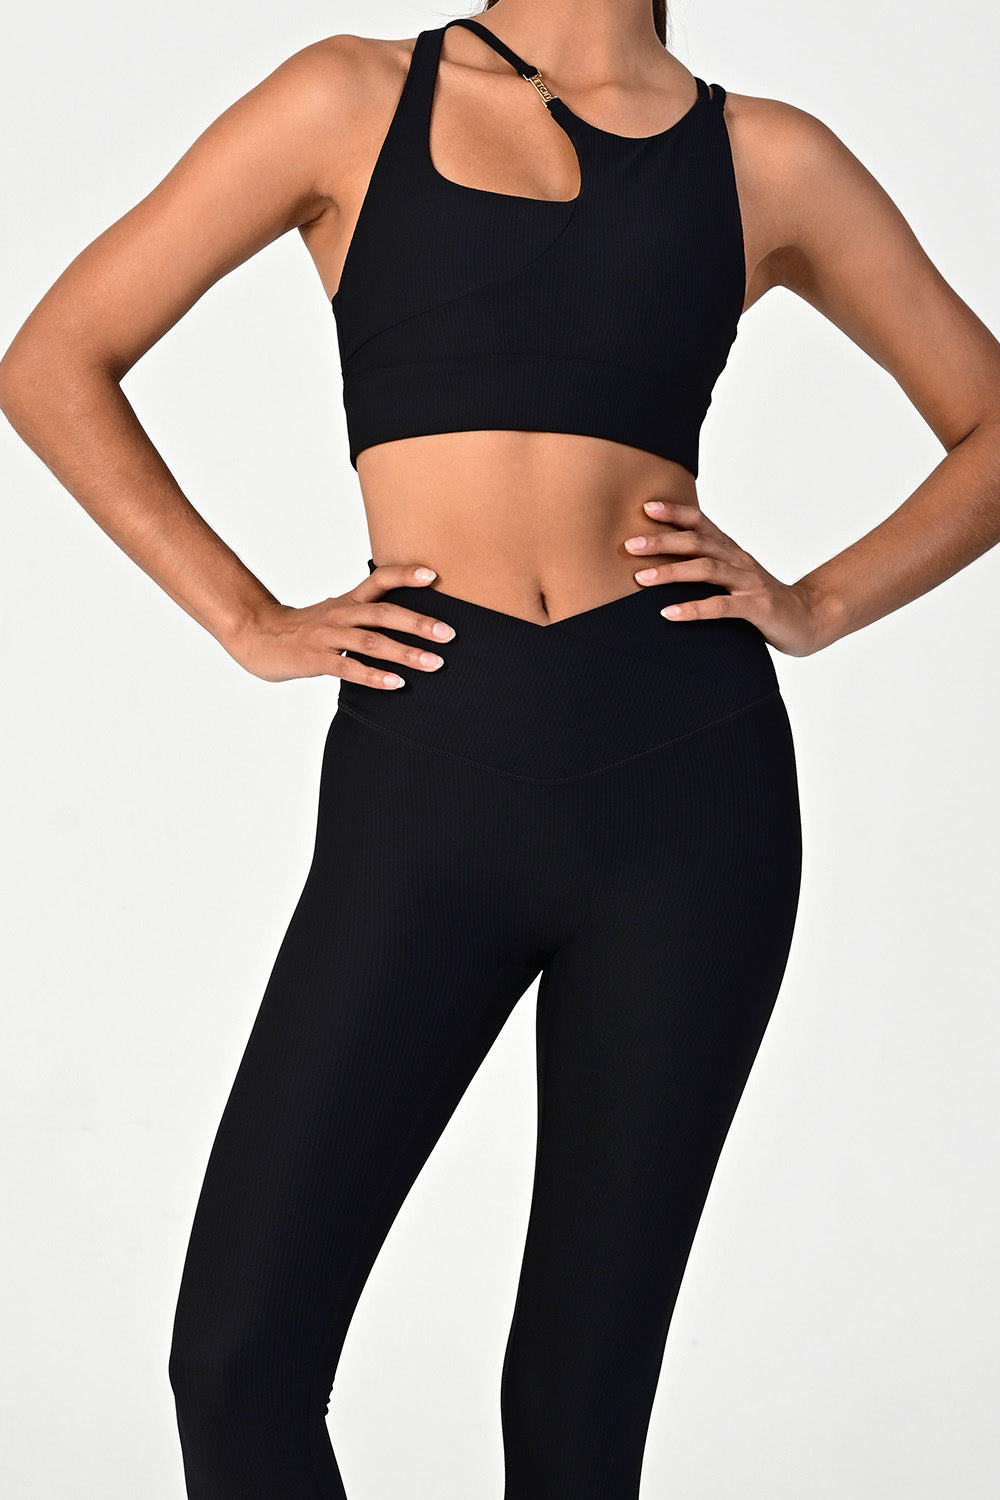 Woman posing and wearing the melrose black ribbed leggings and bra top close up front view